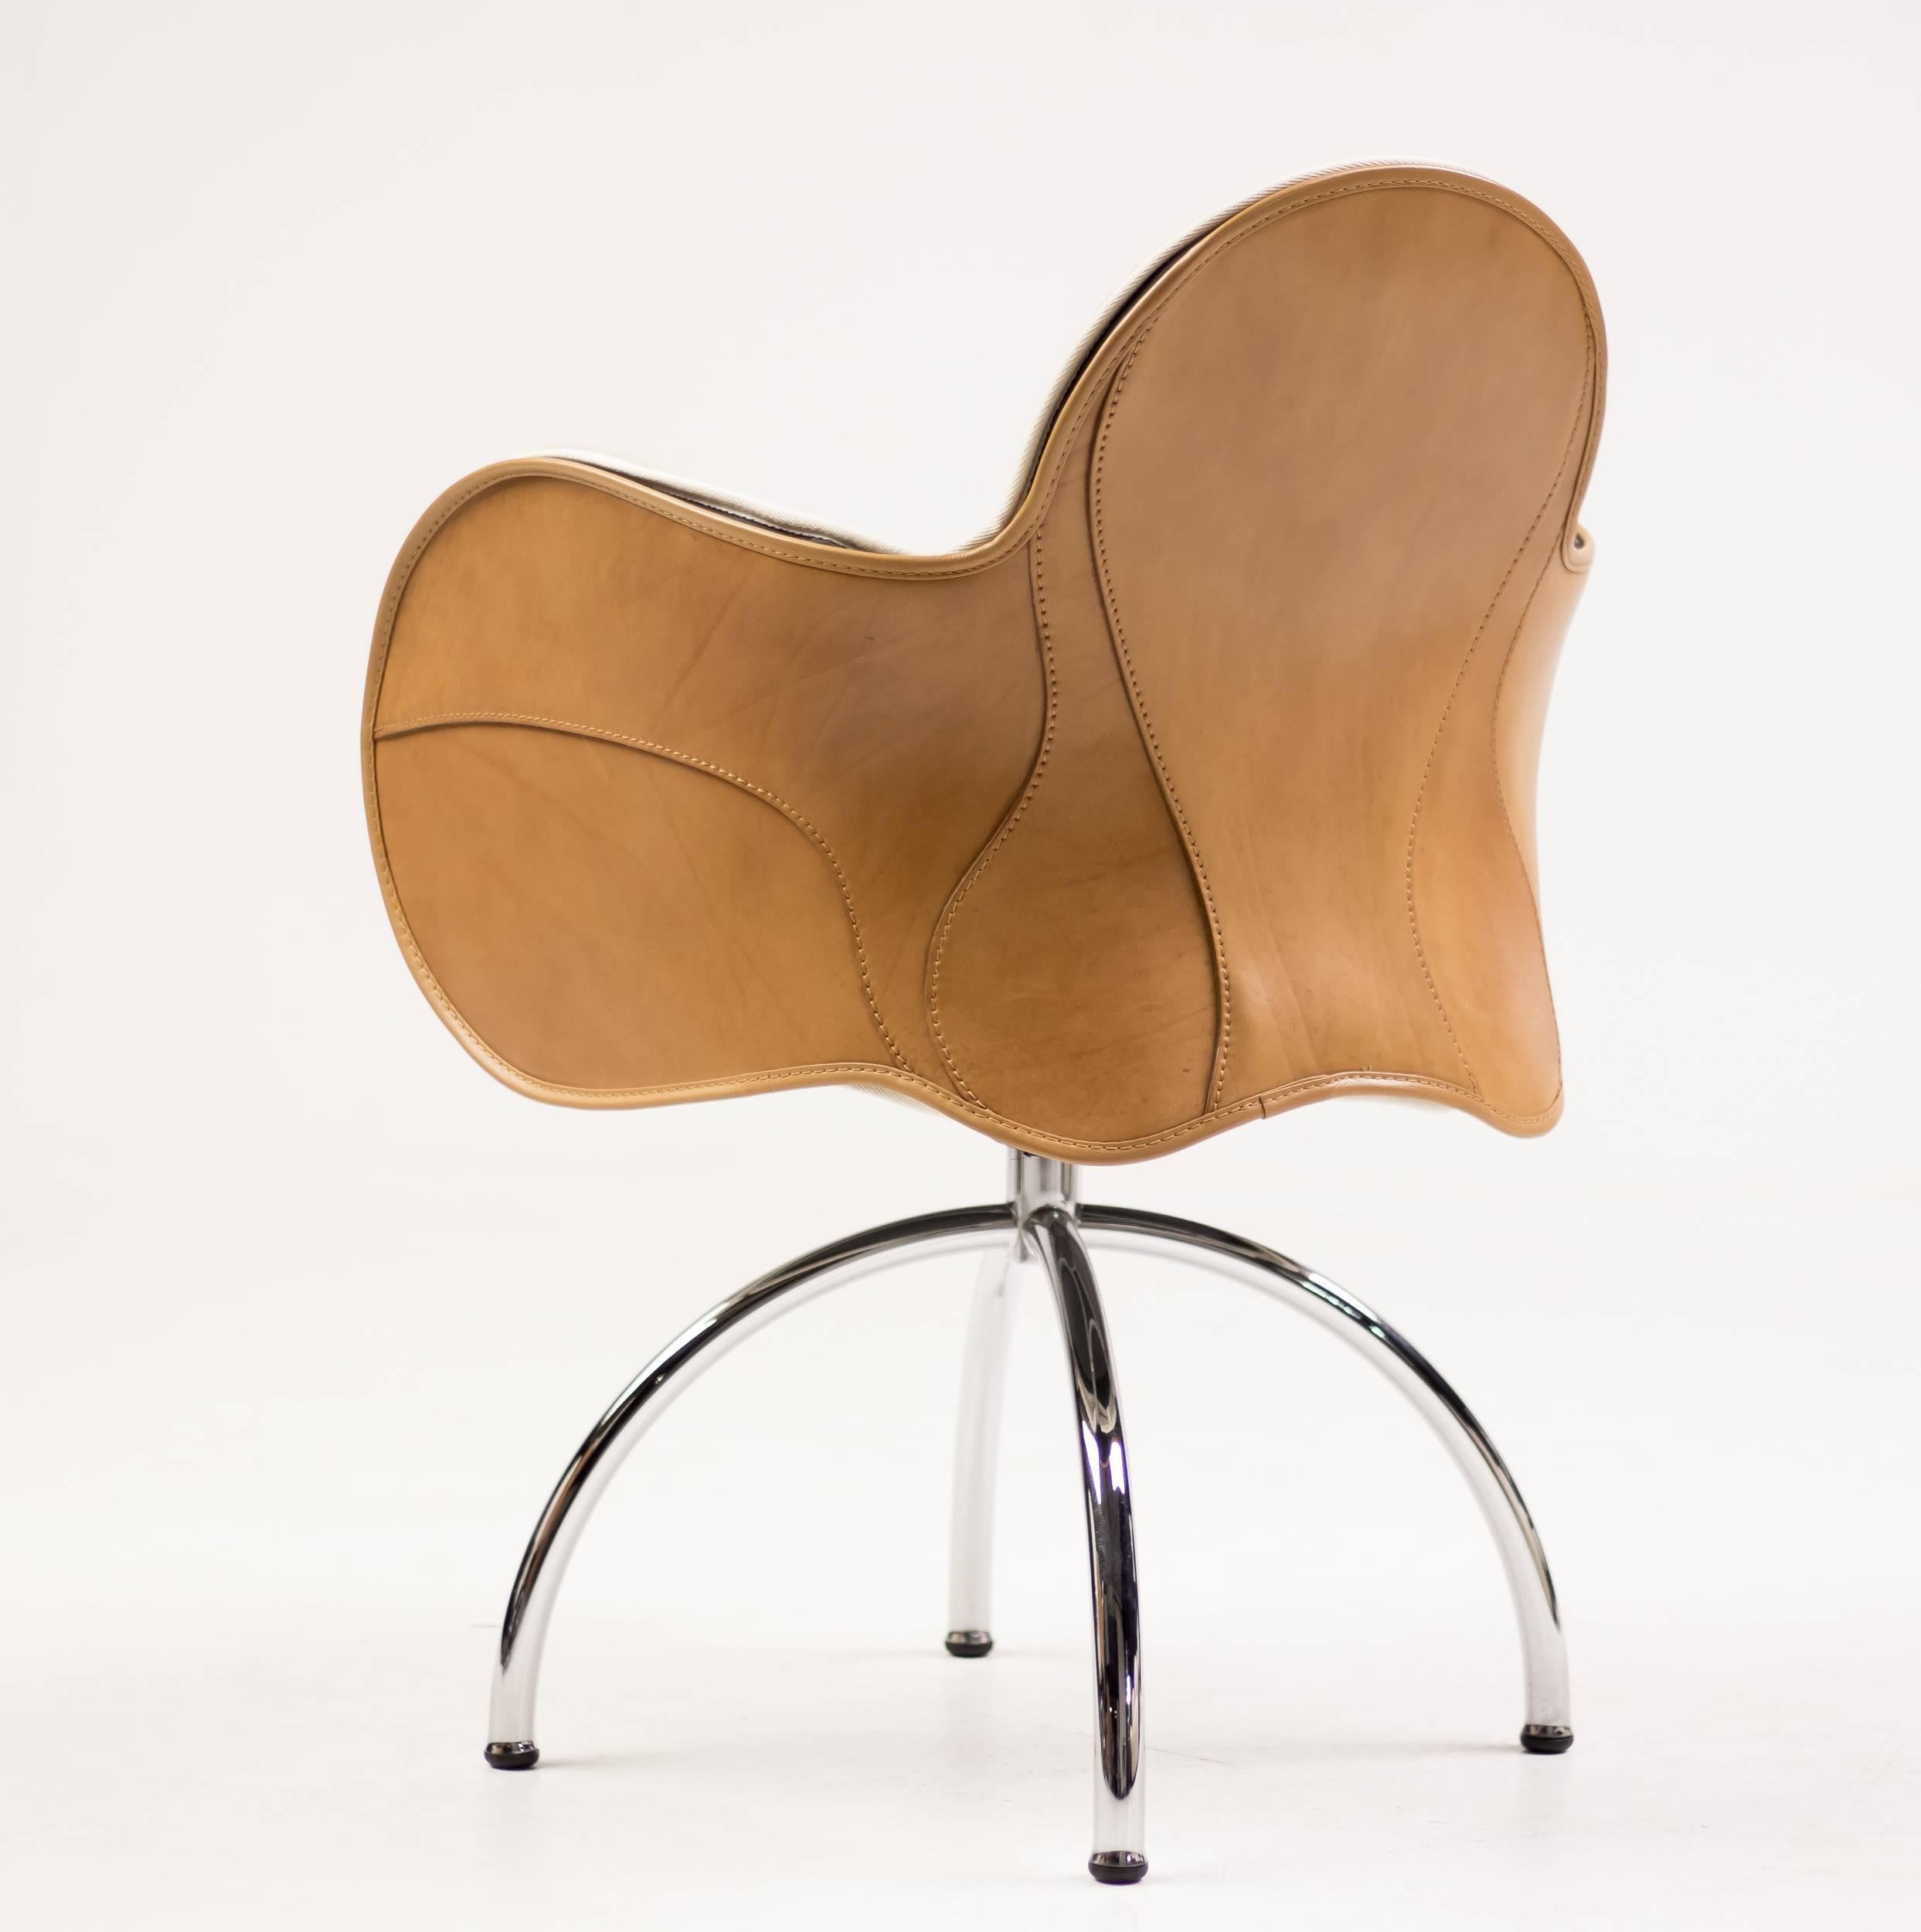 De Padova Incisa Chair and Serbelloni Desk Chair in Saddle Leather 1